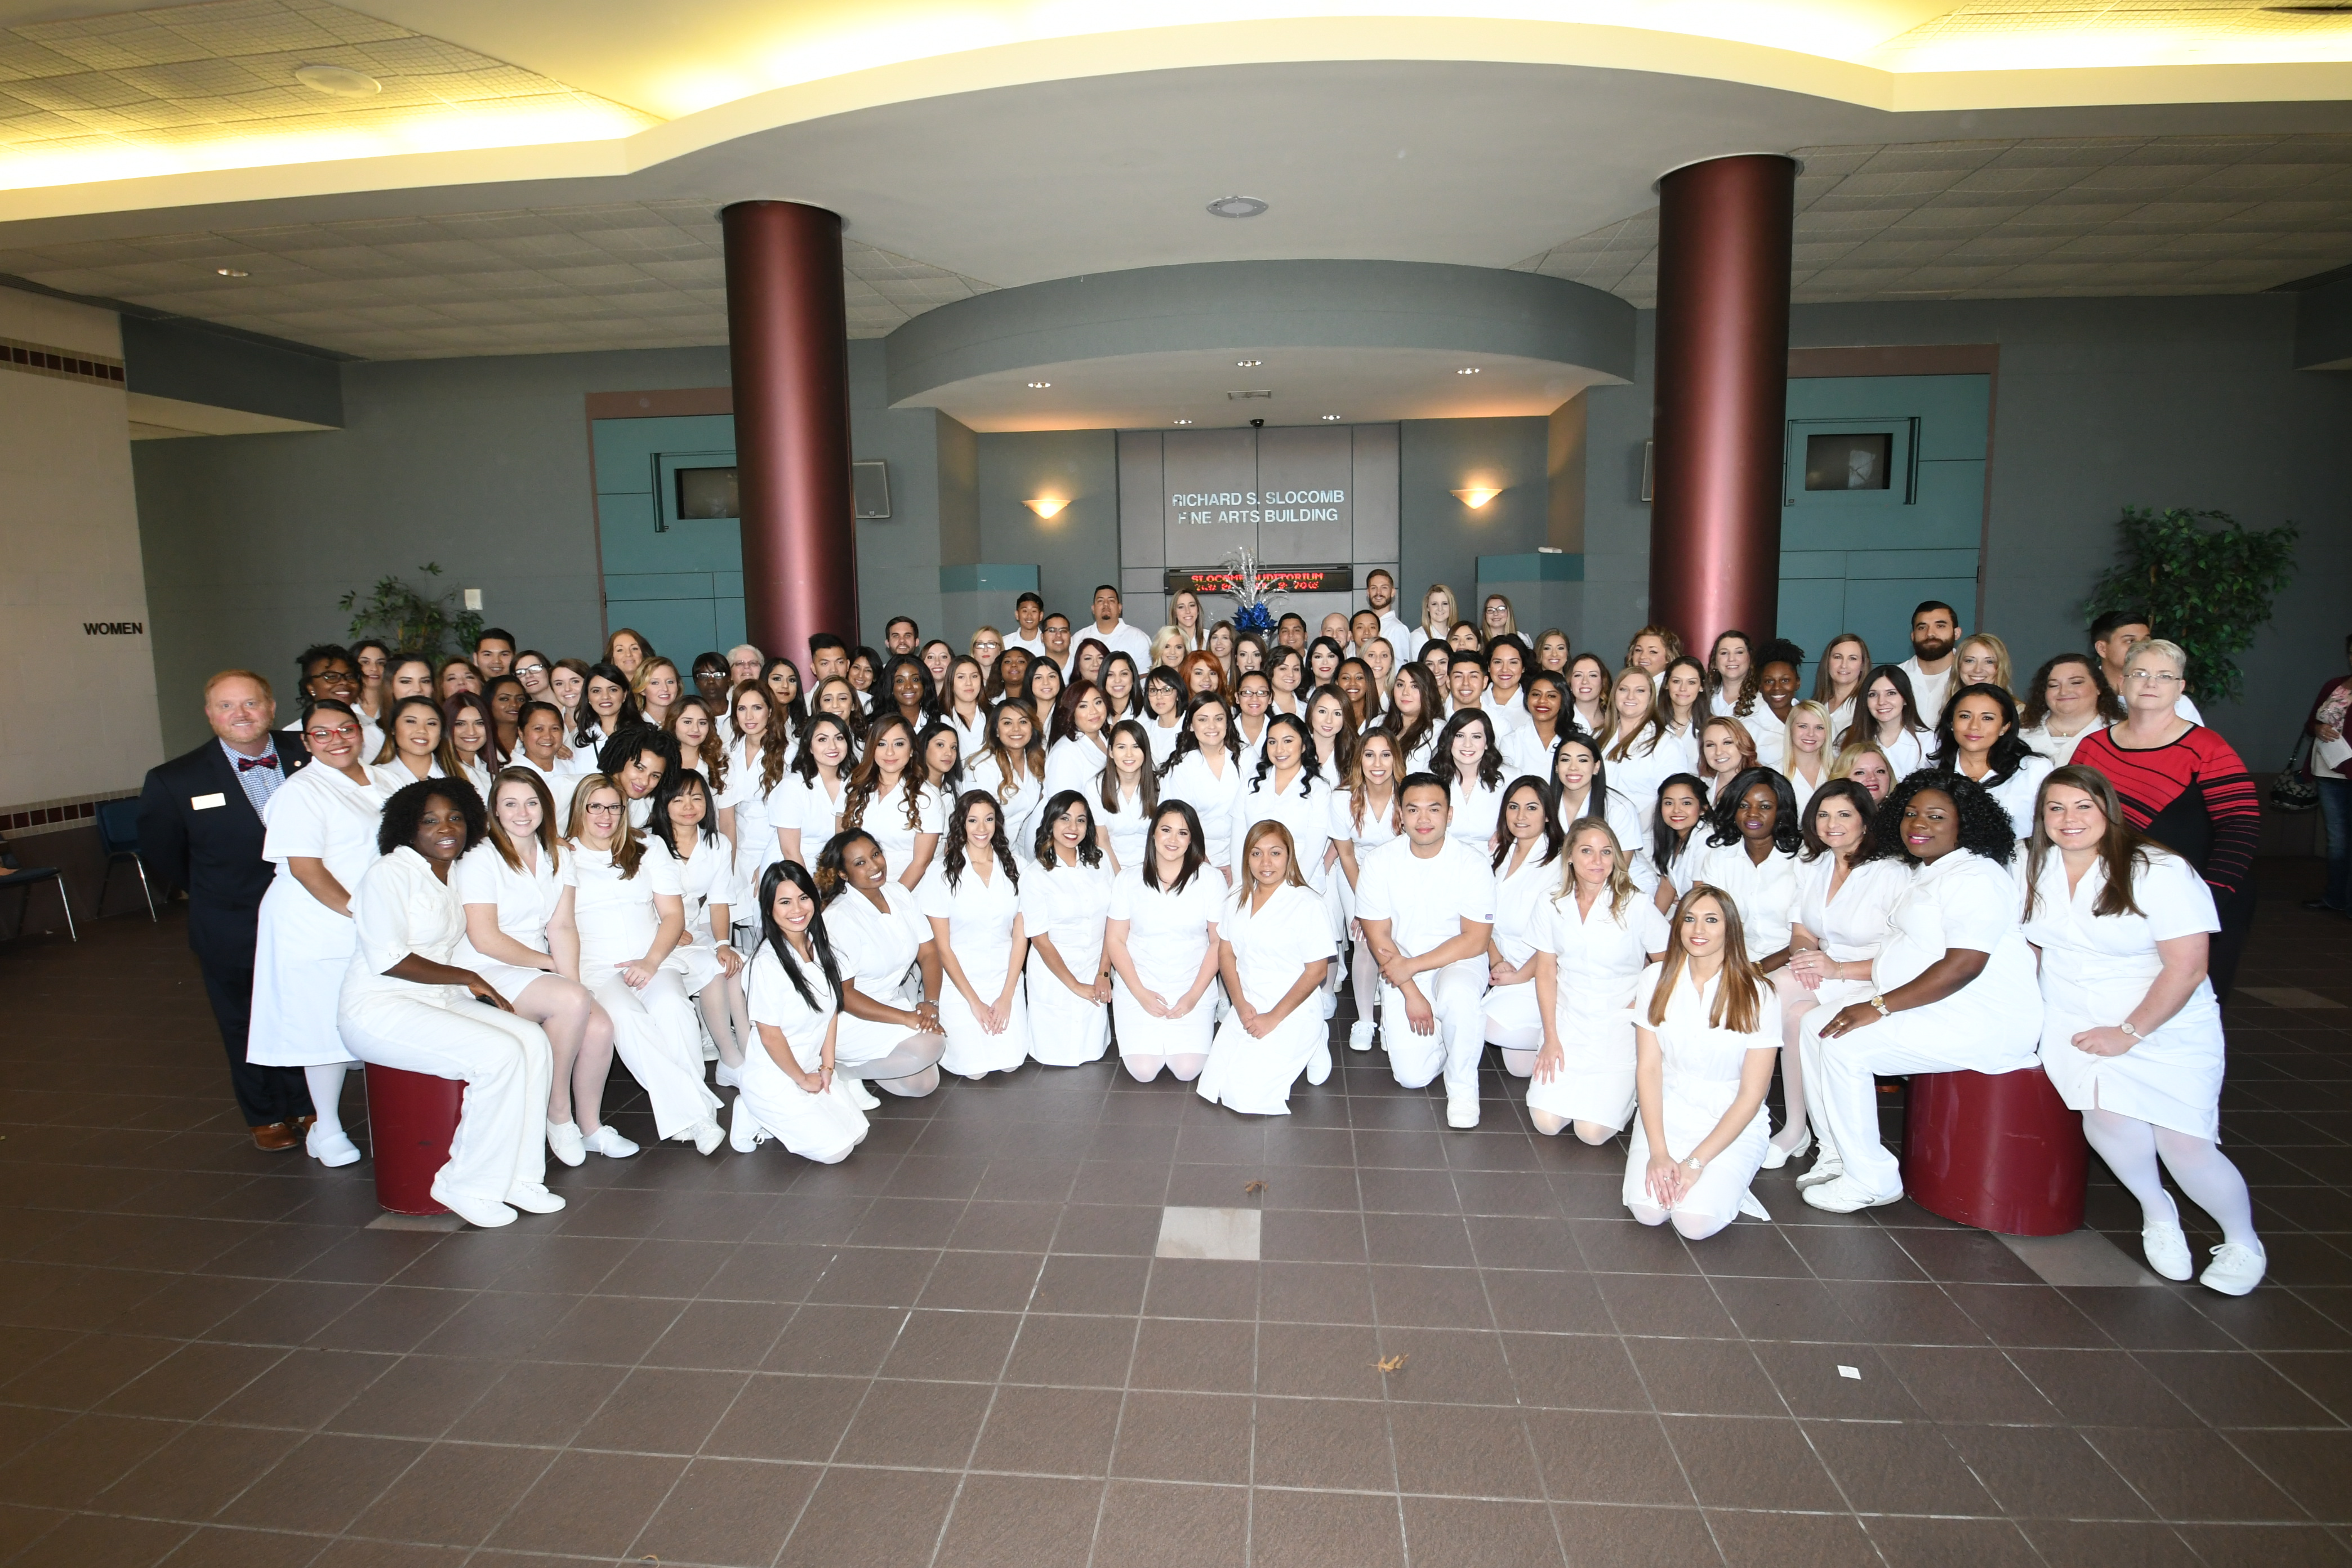 Fall 2016 San Jacinto College nursing graduates from North Campus. Photo credit: Jeannie Peng Mansyur, San Jacinto College public relations, marketing and government affairs